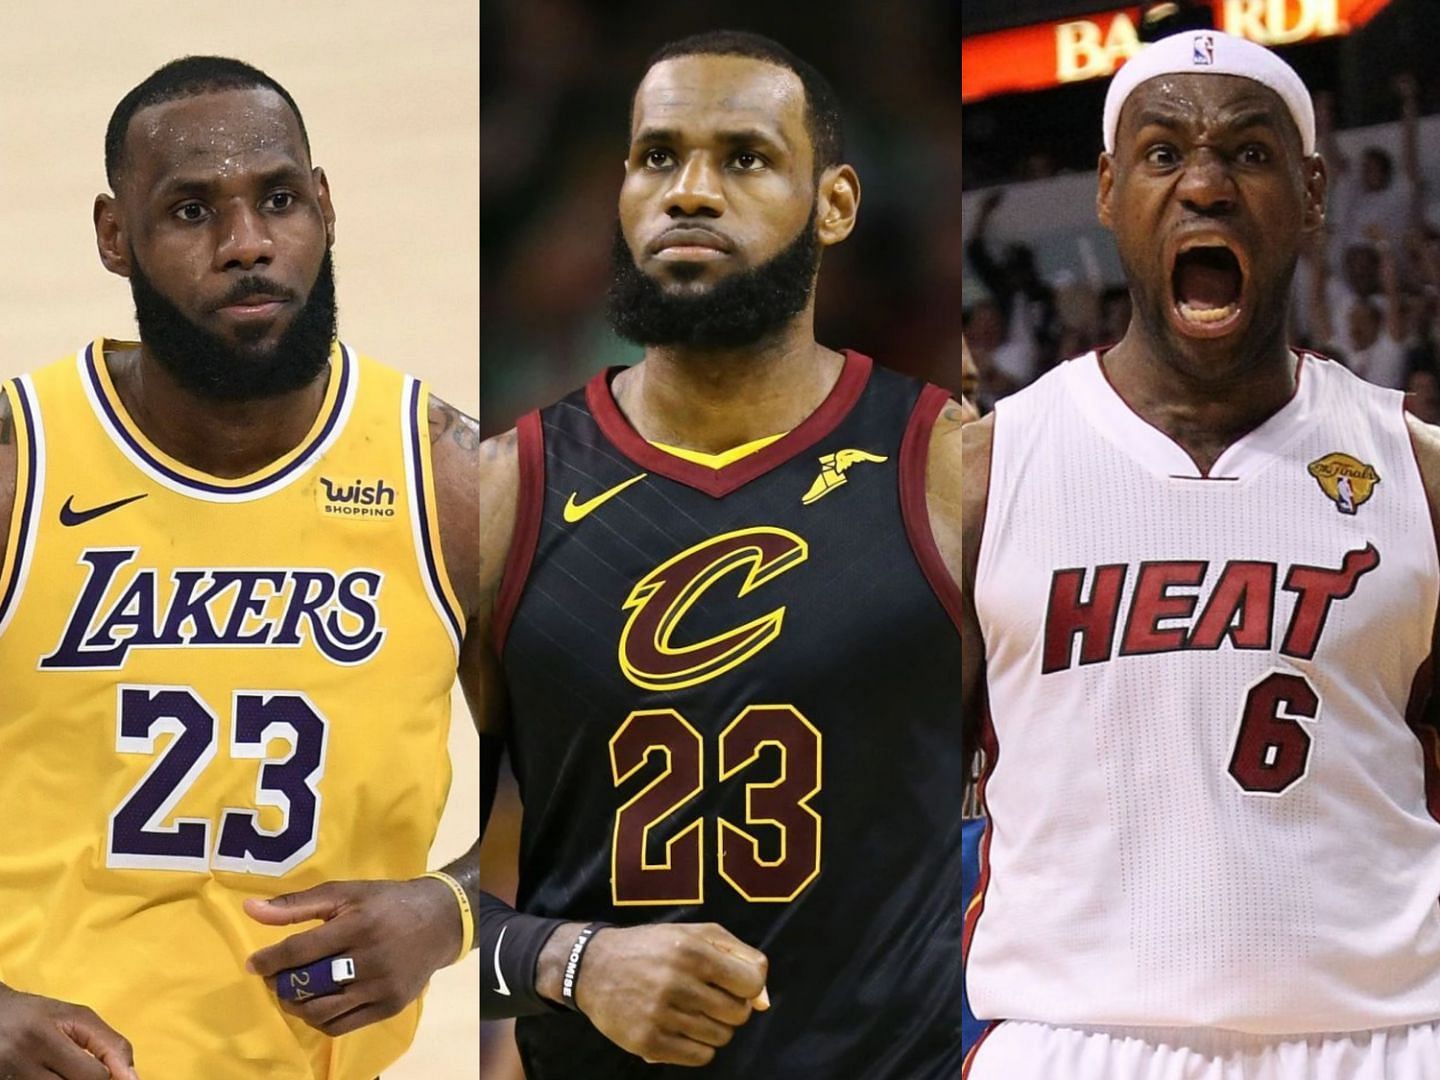 LeBron James has played for the Cleveland Cavaliers, Miami Heat and LA Lakers